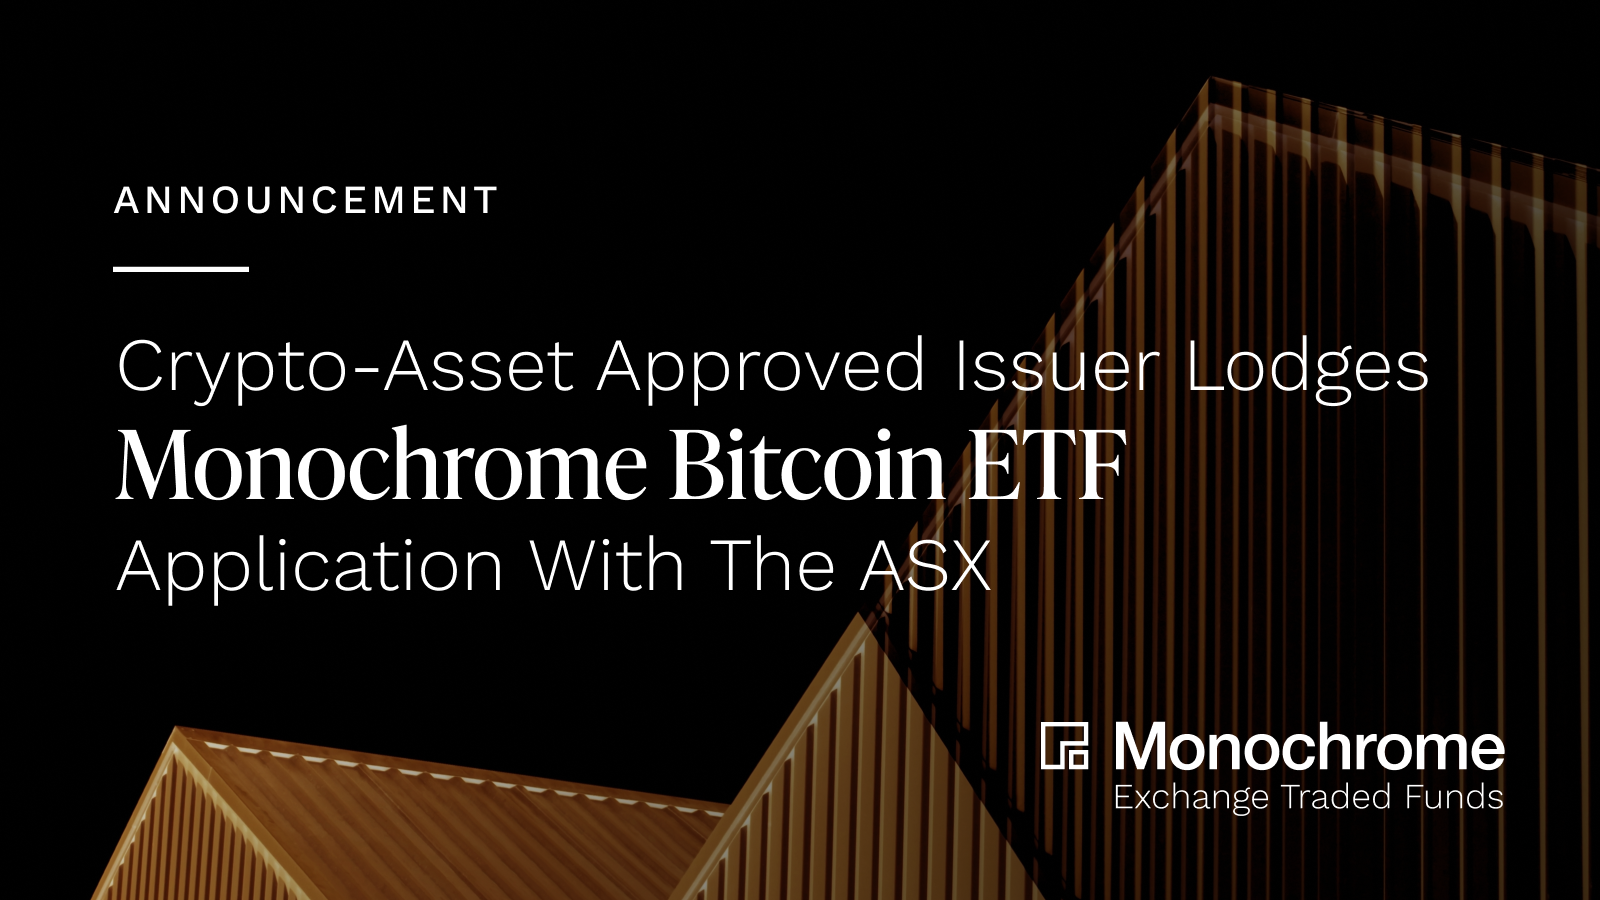 Monochrome Bitcoin ETF_Announcement_Crypto-Asset Approved Issuer Lodges Monochrome Bitcoin ETF Application With The ASX_1600x900.png